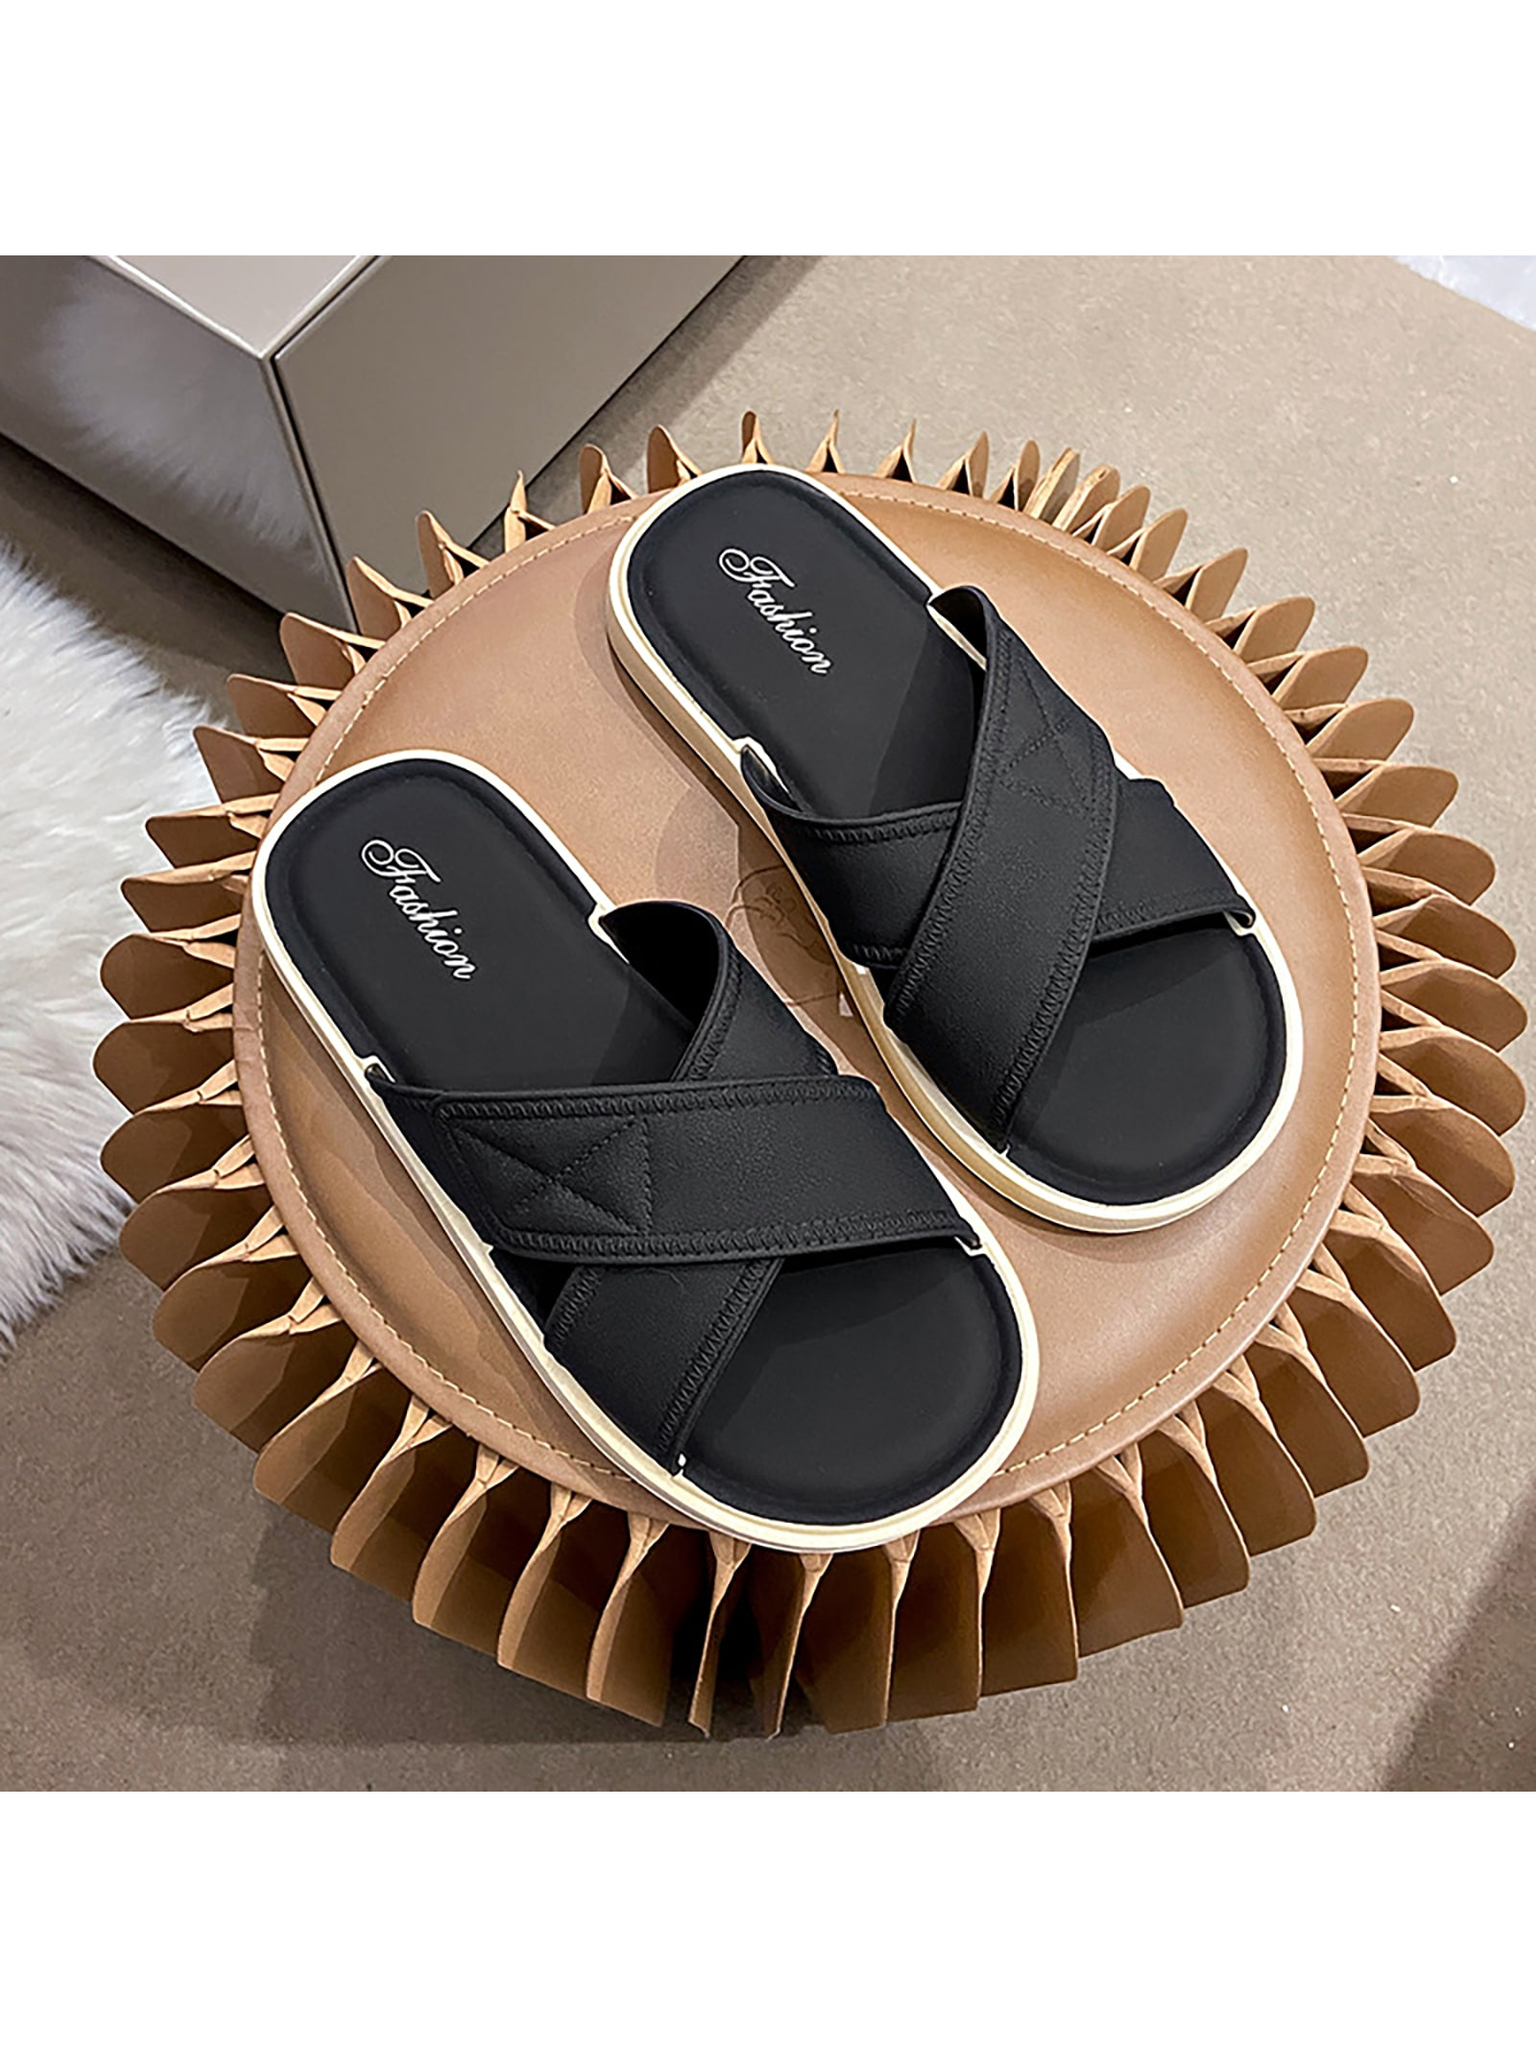 New Arrival Fashionable Simple Elegant Slippers For Home, Bathroom And Outdoor With Soft Pvc Slip-Resistant Bottom, Suitable For Indoor And Outdoor Wear, Fashion Style-Black-2